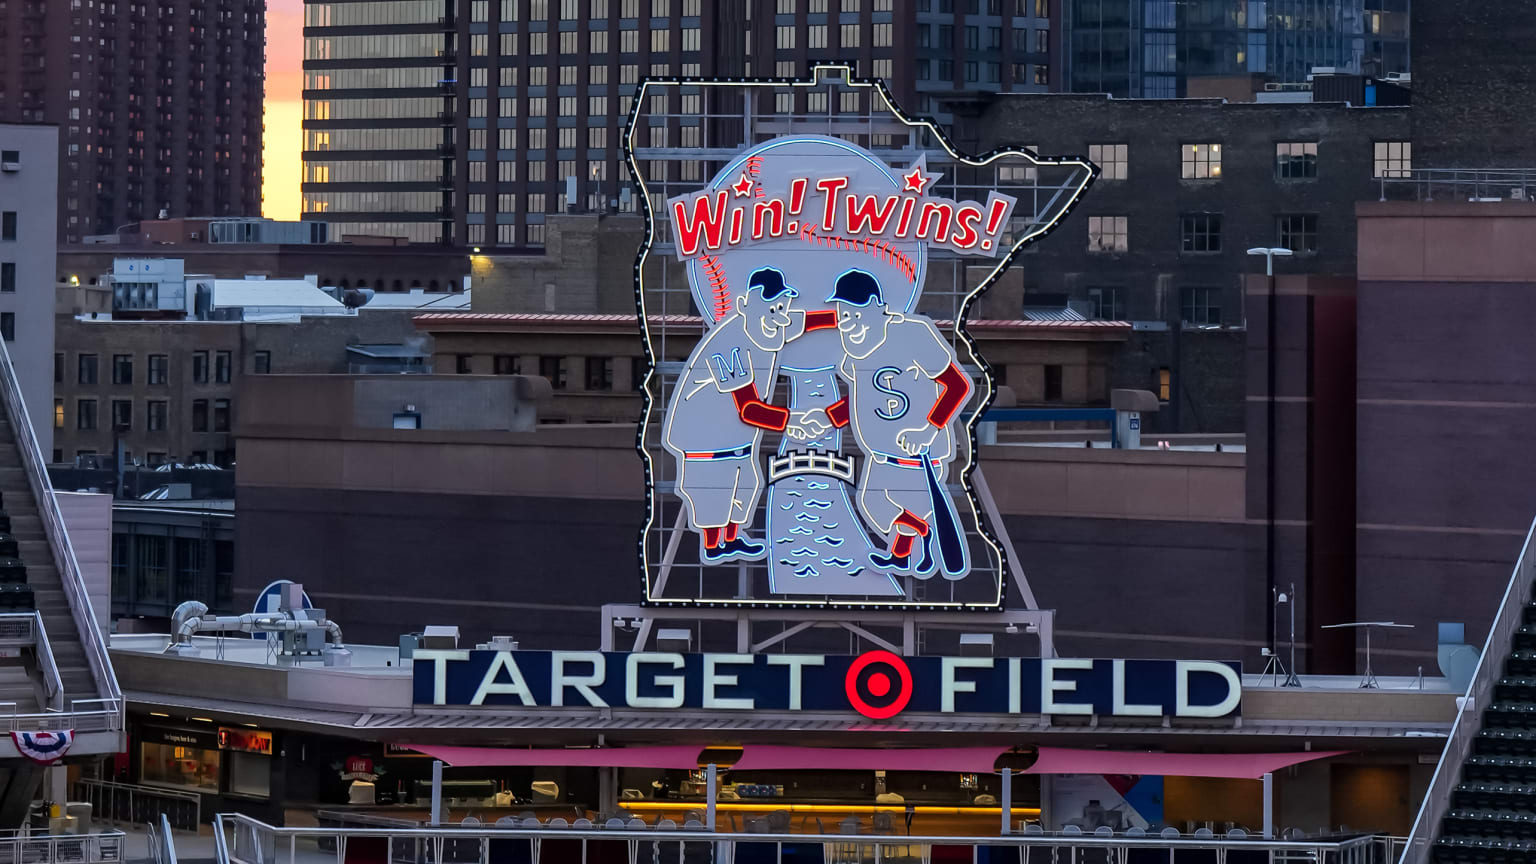 Information and details for watching a game at Target Field